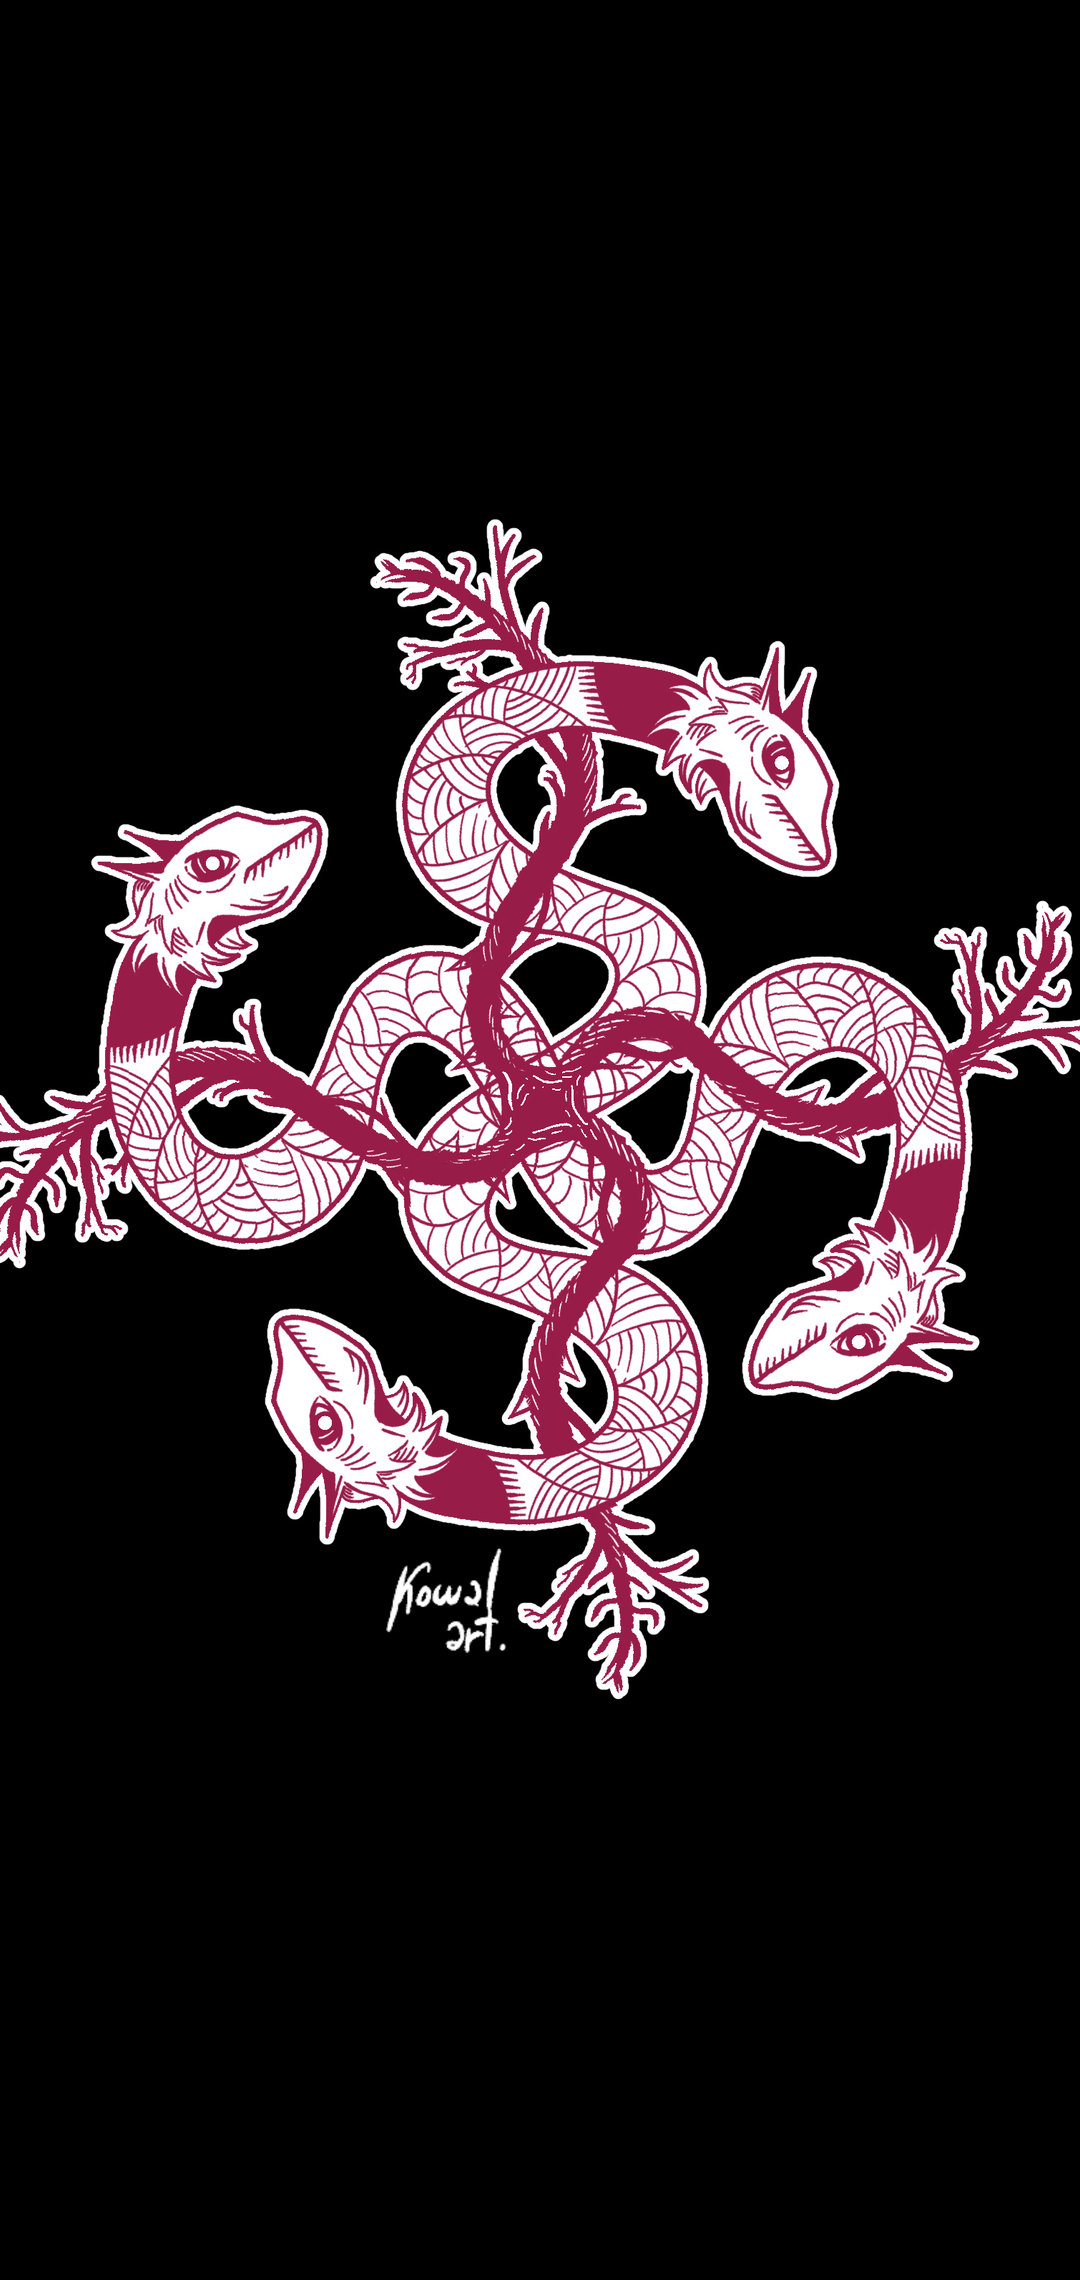 IPhone wallpaper with a pink and white snake design on a black background - Snake